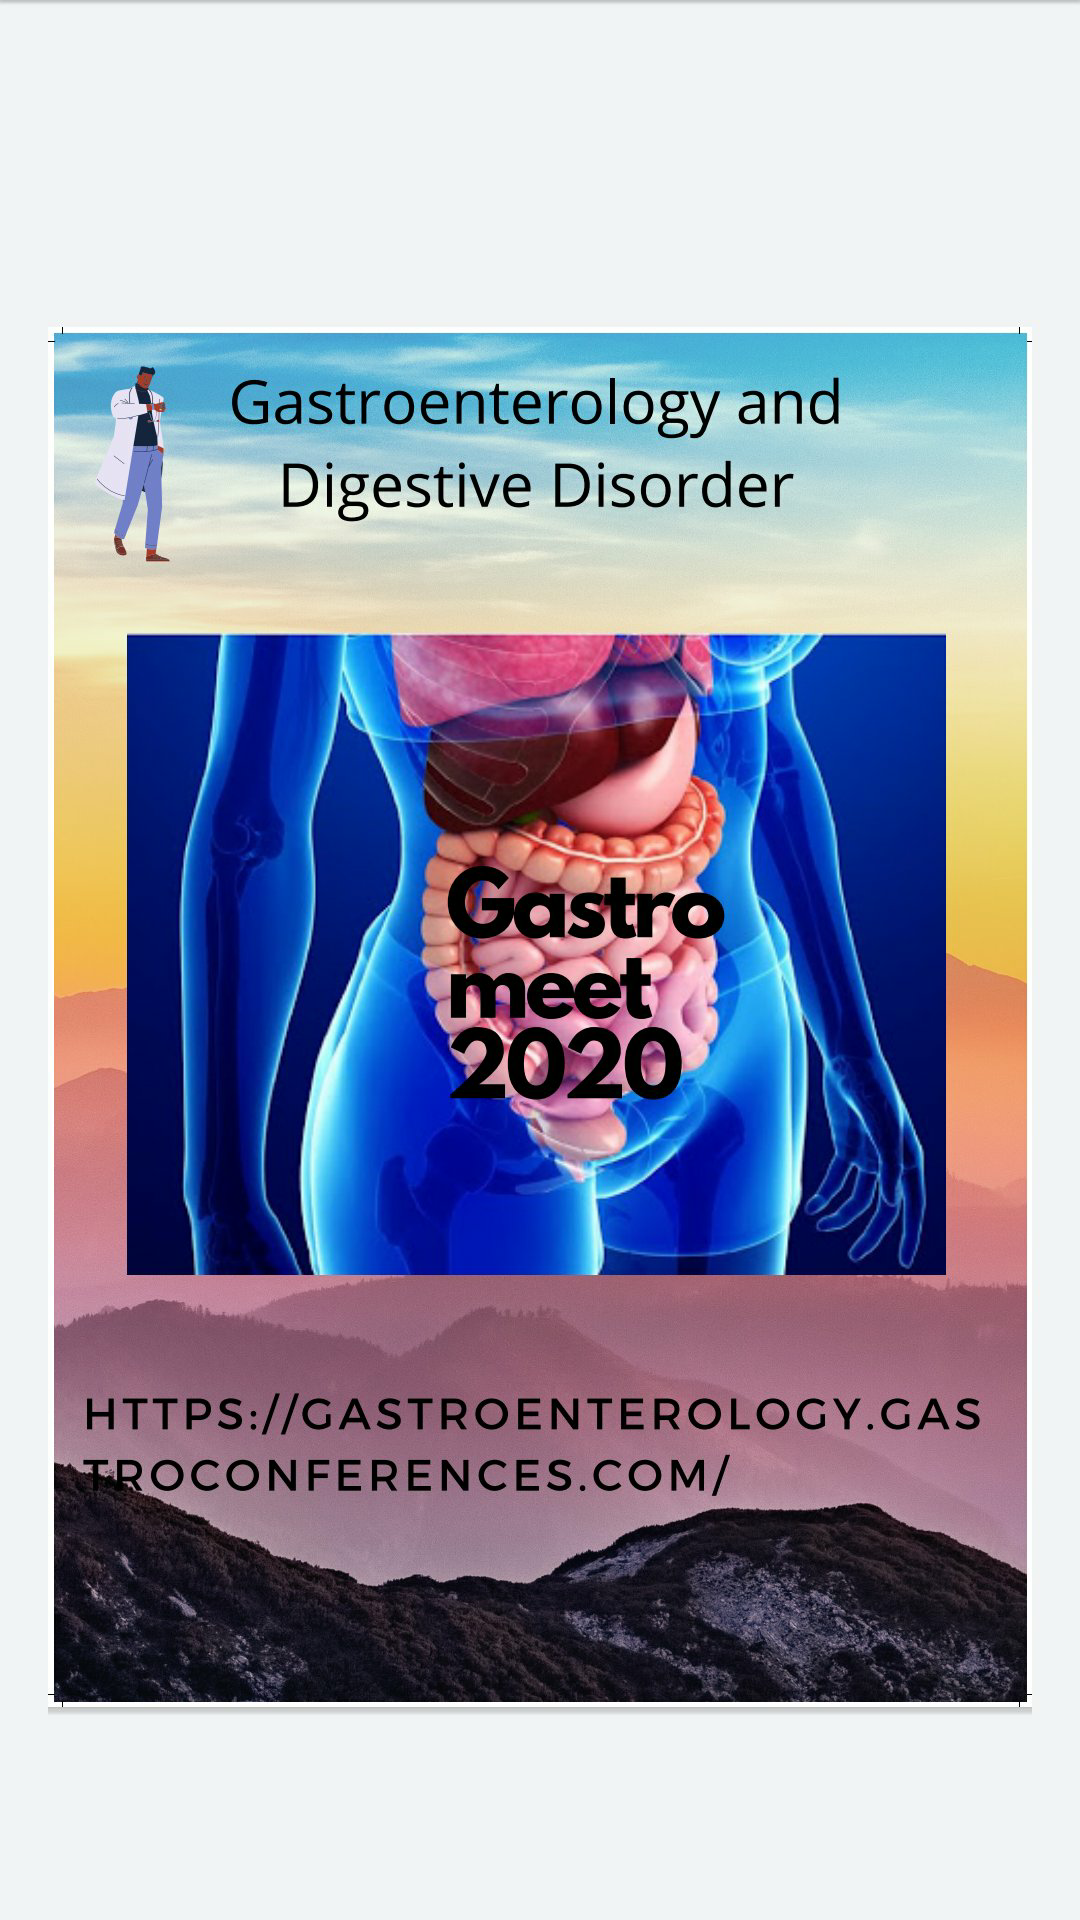 19th International Conference on Gastroenterology and Digestive Disorders